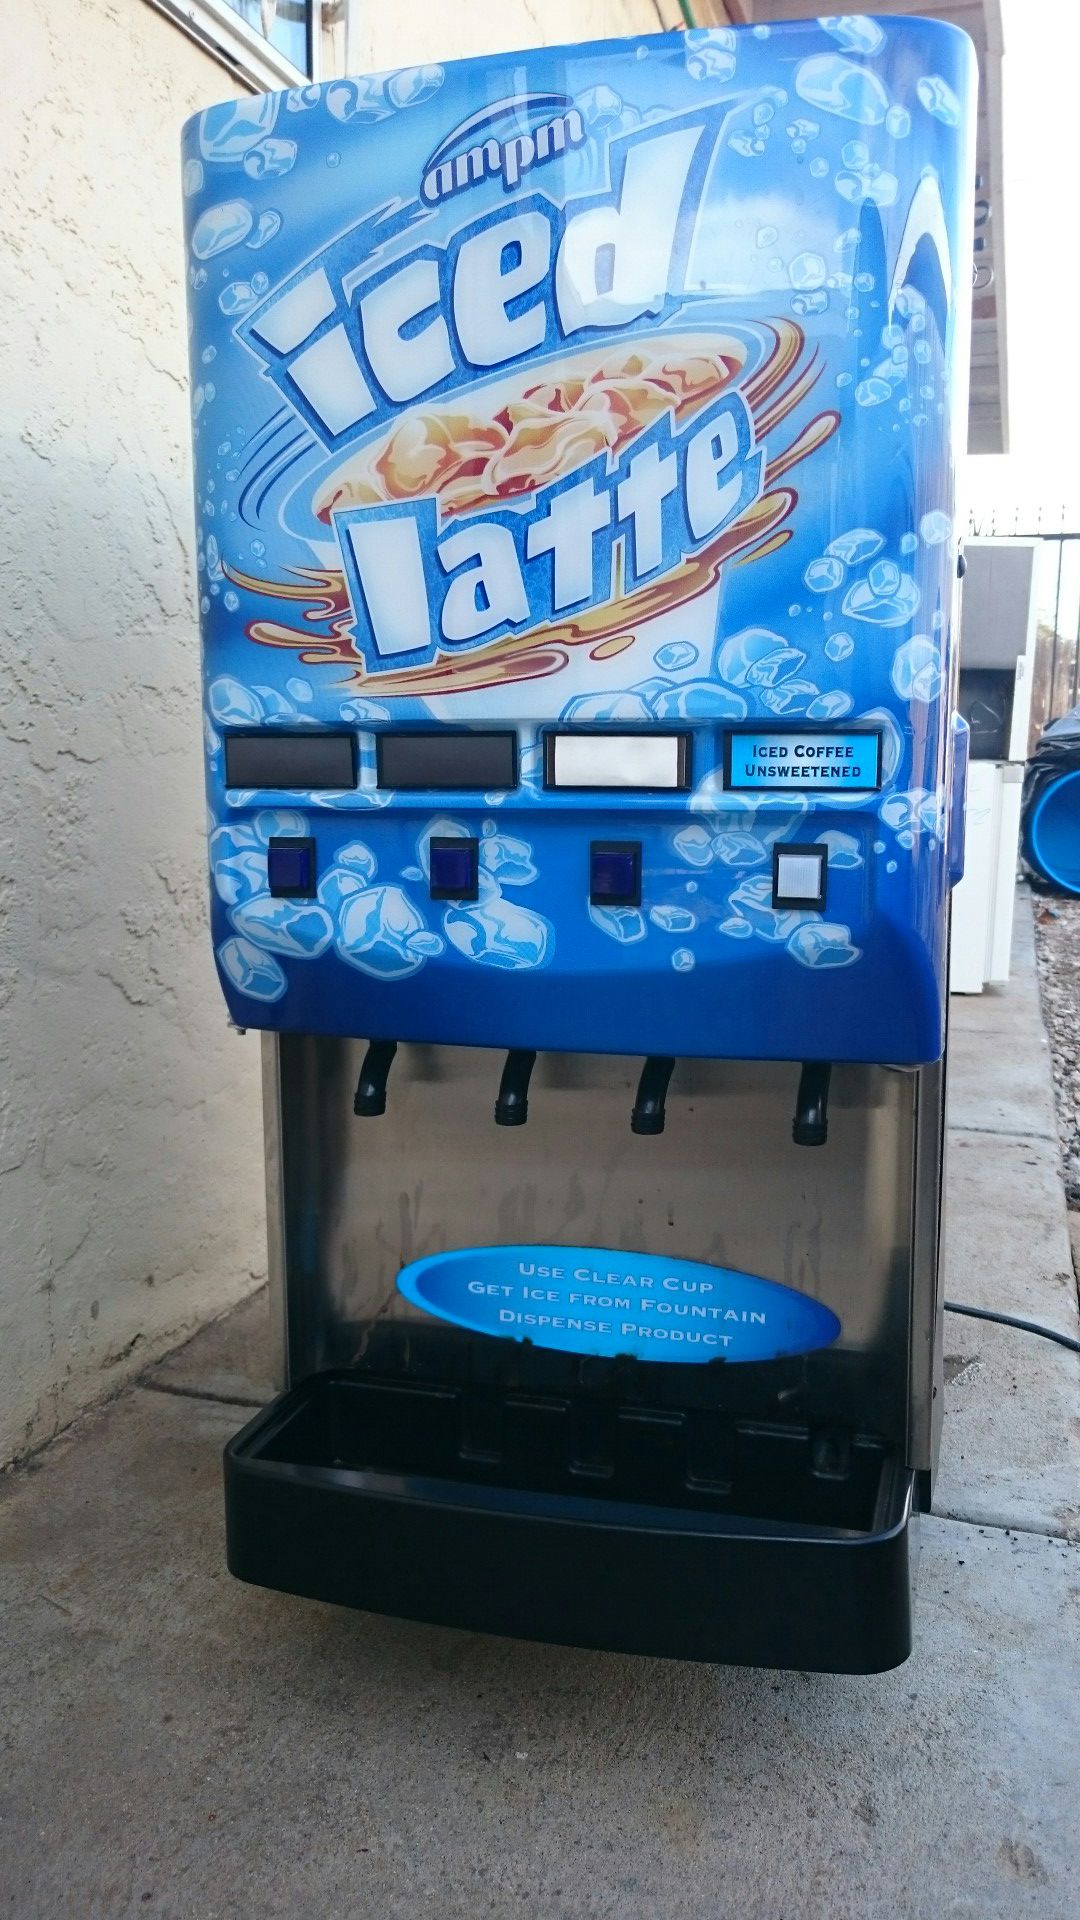 Am/ Pm Iced Cold Latte Machine for Sale in El Cajon, CA - OfferUp